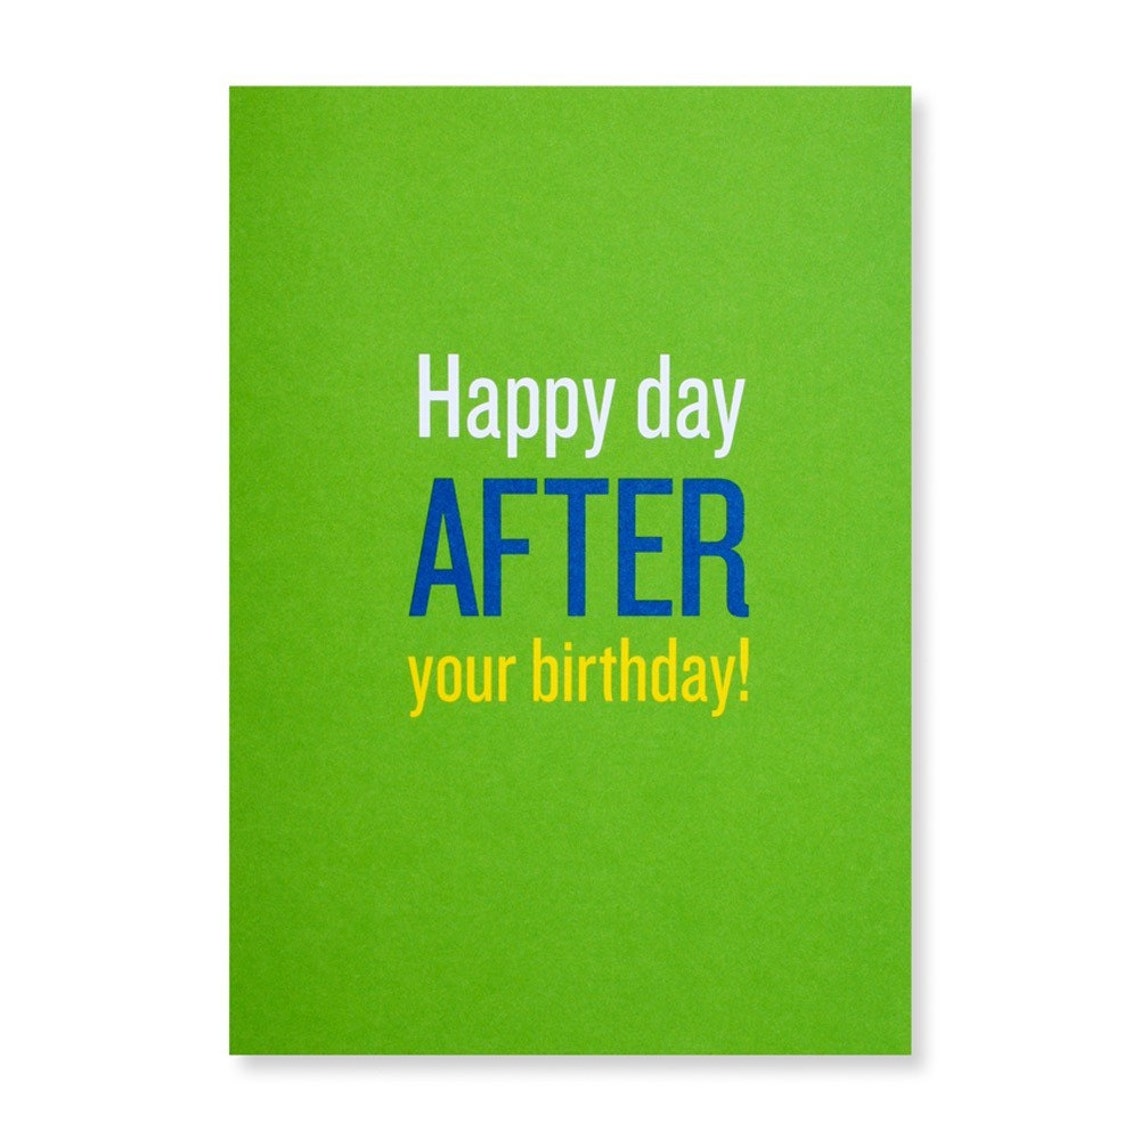 Happy Day After Your Birthday Greeting Card | Etsy